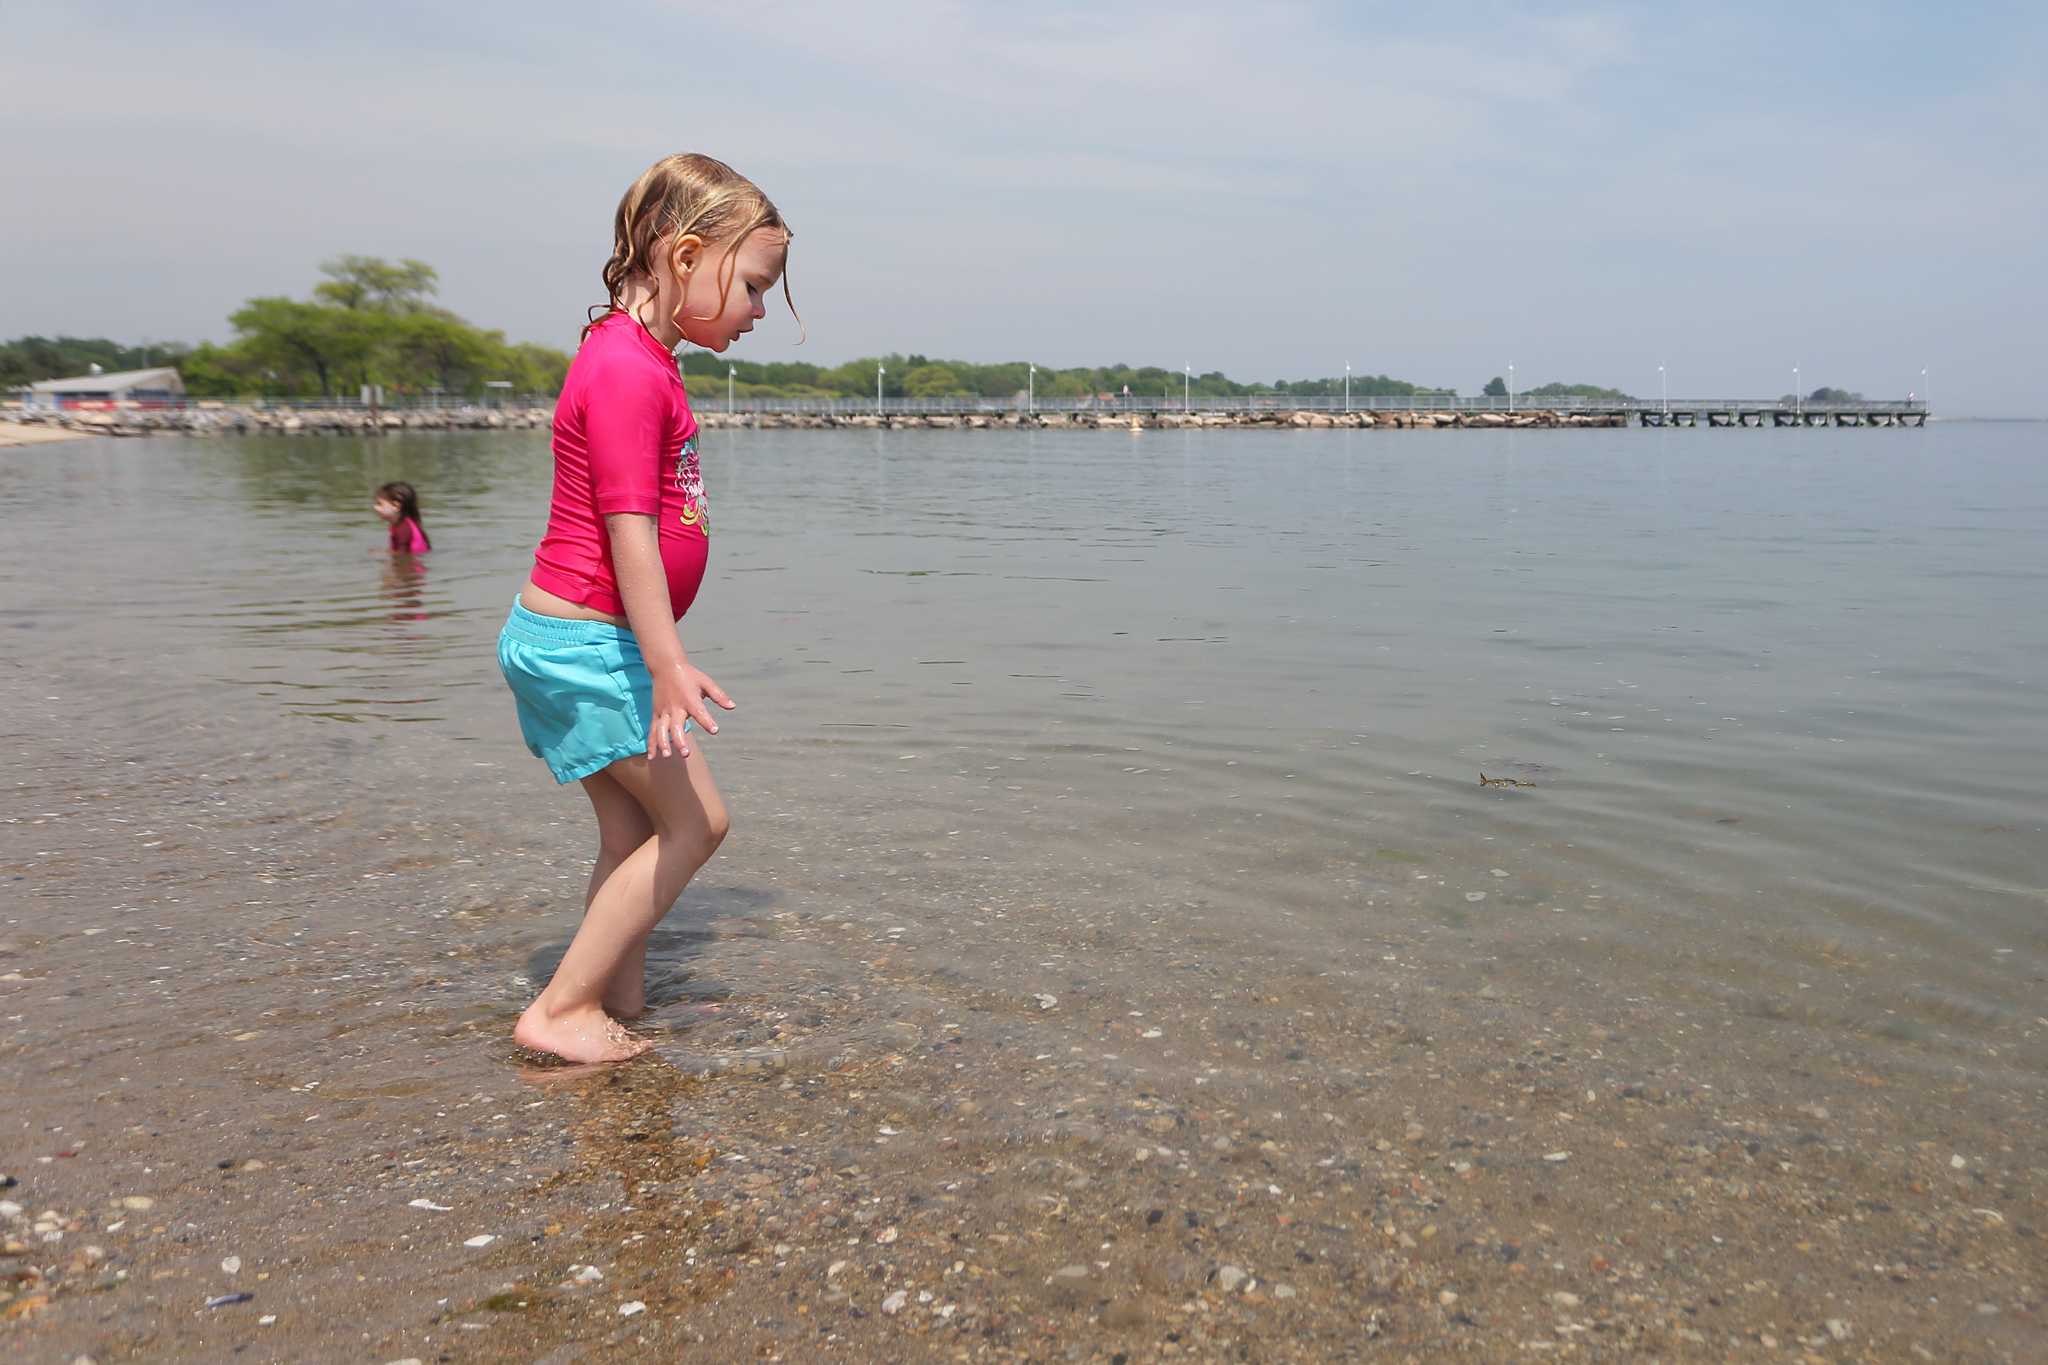 Stamford sells record number of beach passes